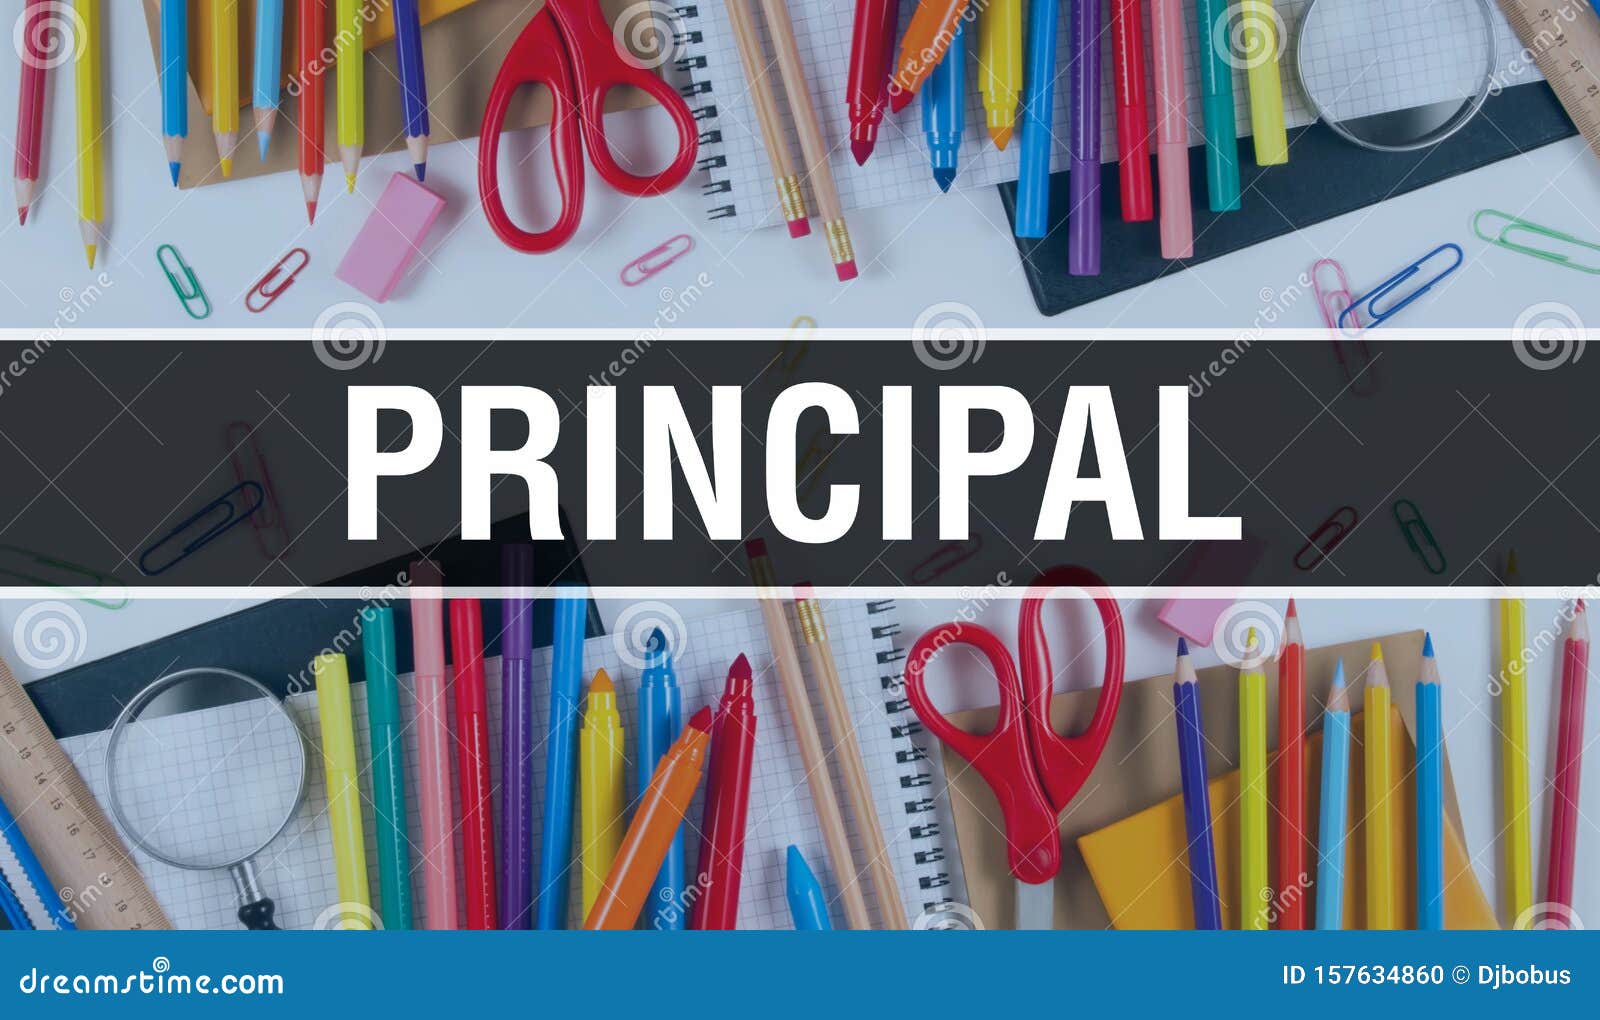 principal with school supplies on blackboard background. principal text on blackboard with school items and s. back to